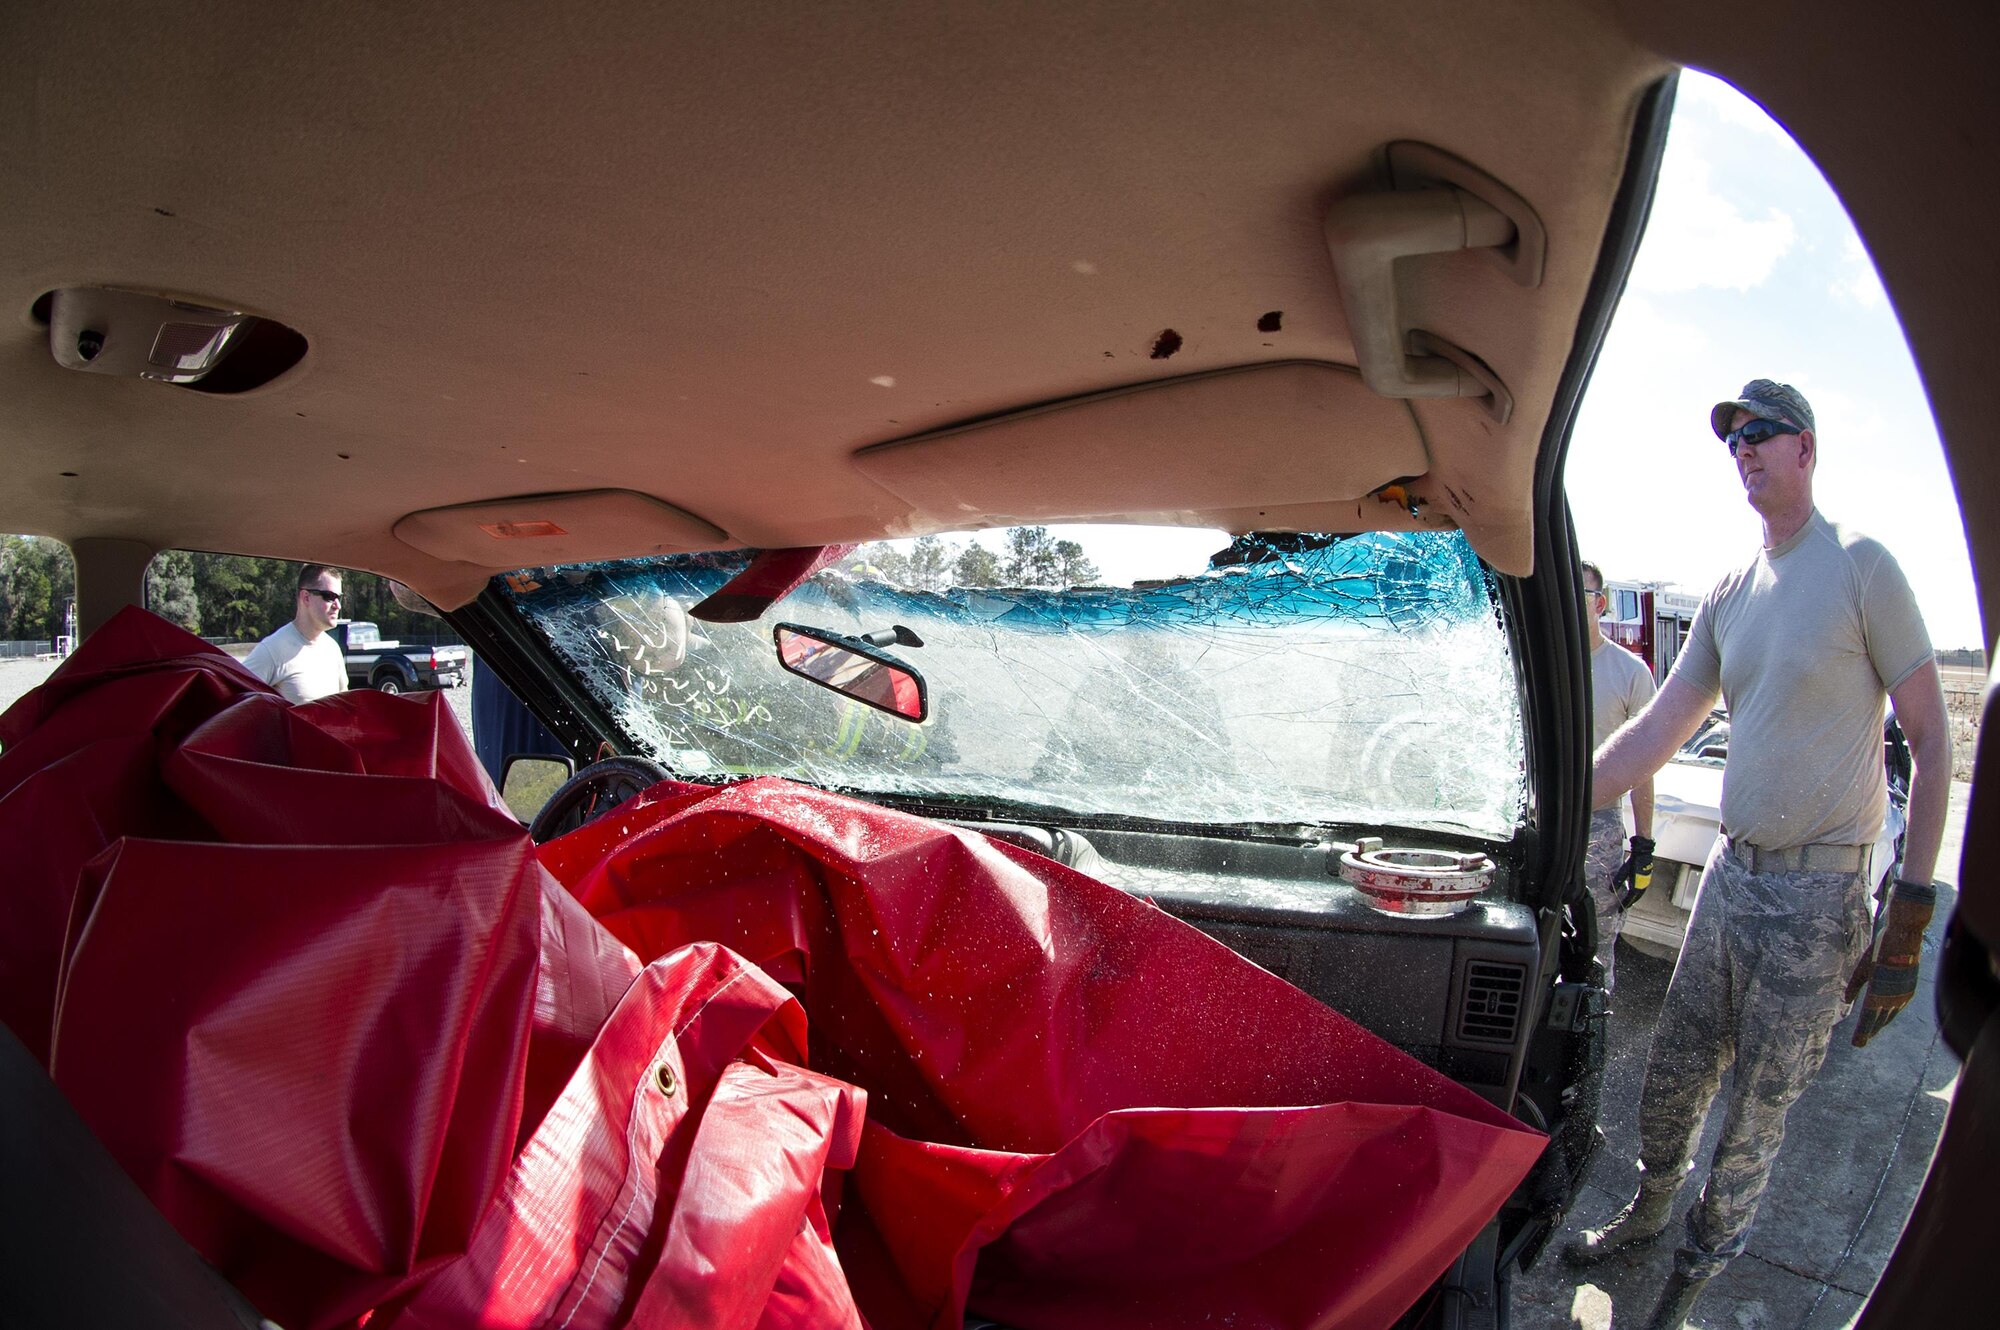 A participant uses an axe to cut through a windshield, during Vehicle Extrication training, Jan. 13, 2017, at Moody Air Force Base, Ga. After loosening the windshield from the supports, firefighters can fold it over the hood or completely remove the windshield depending on how they want to remove the patient from the vehicle. (U.S. Air Force photo by Airman 1st Class Janiqua P. Robinson)